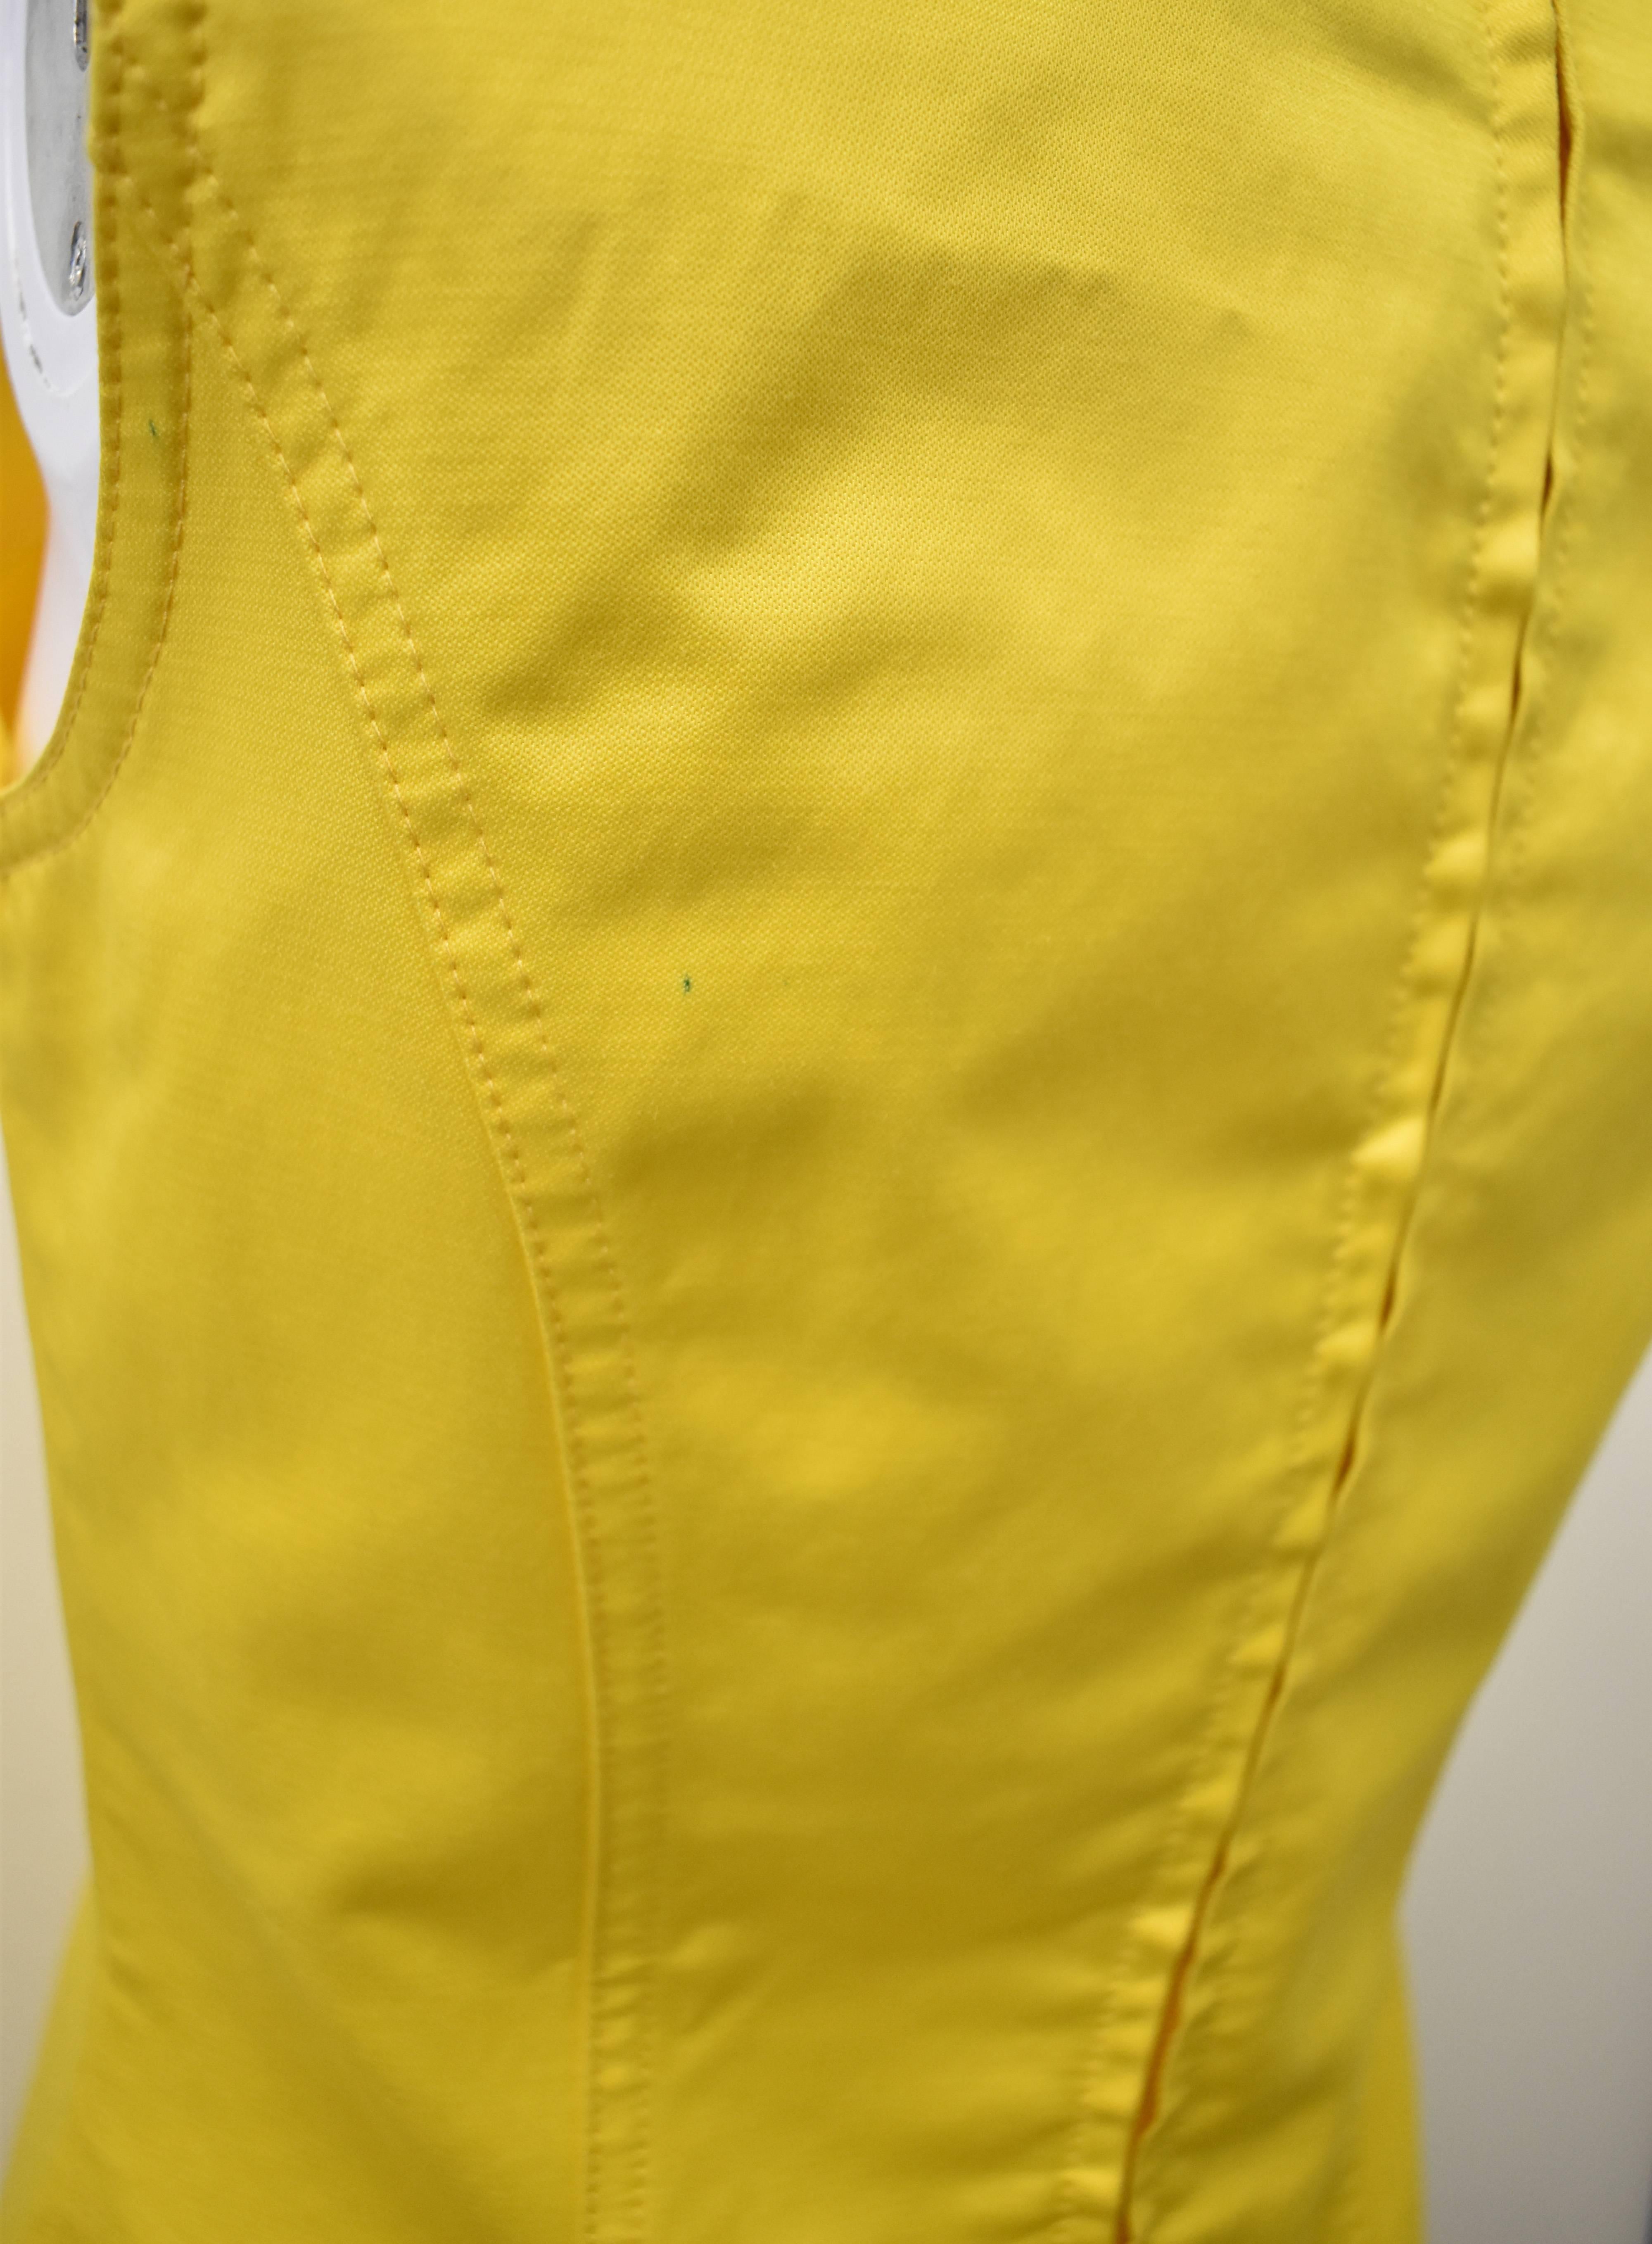 Moschino Jeans Yellow Fitted Mini Dress 1990’s 4